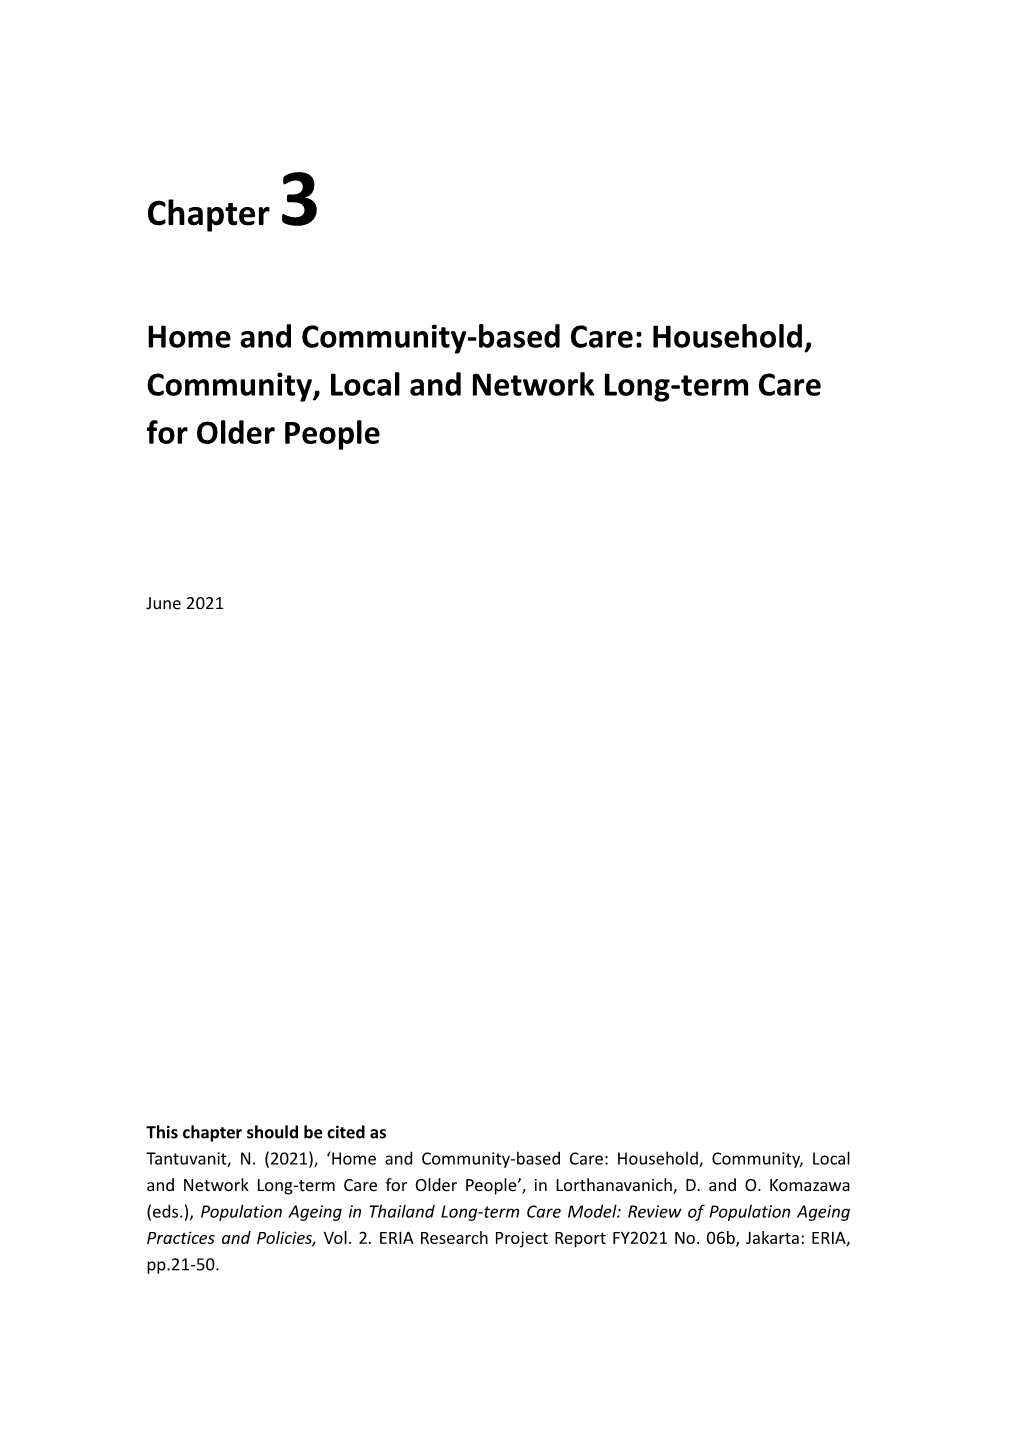 Household, Community, Local and Network Long-Term Care for Older People